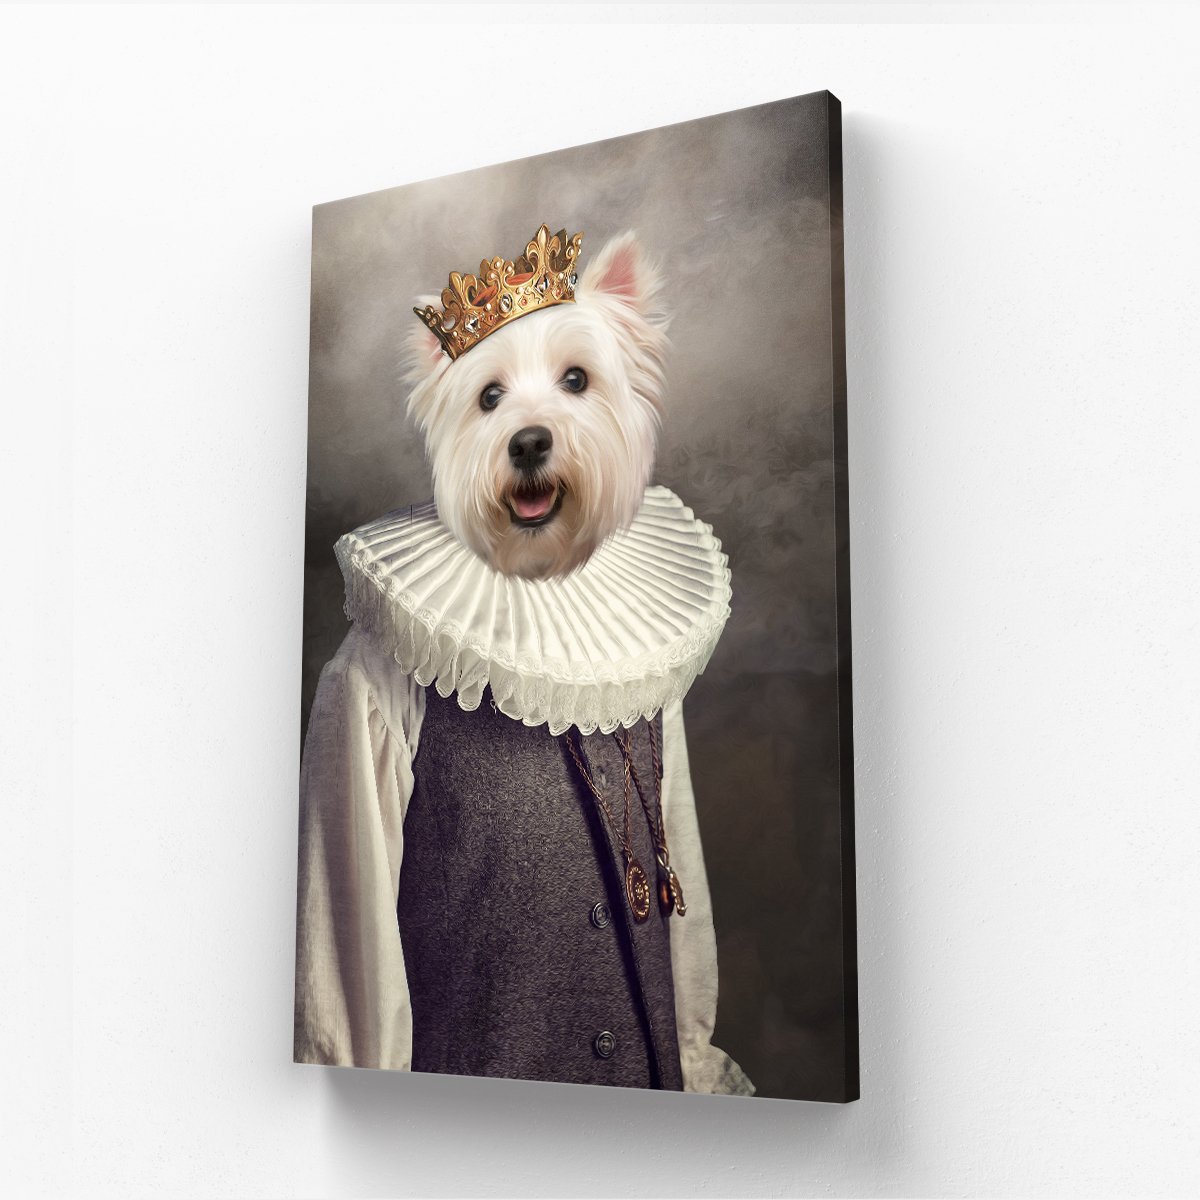 The Young Prince: Custom Pet Canvas - Paw & Glory - #pet portraits# - #dog portraits# - #pet portraits uk#paw and glory, pet portraits canvas,personalized dog canvas, canvas of my dog, personalized dog canvas print, custom canvas dog prints, custom pet canvas portraits